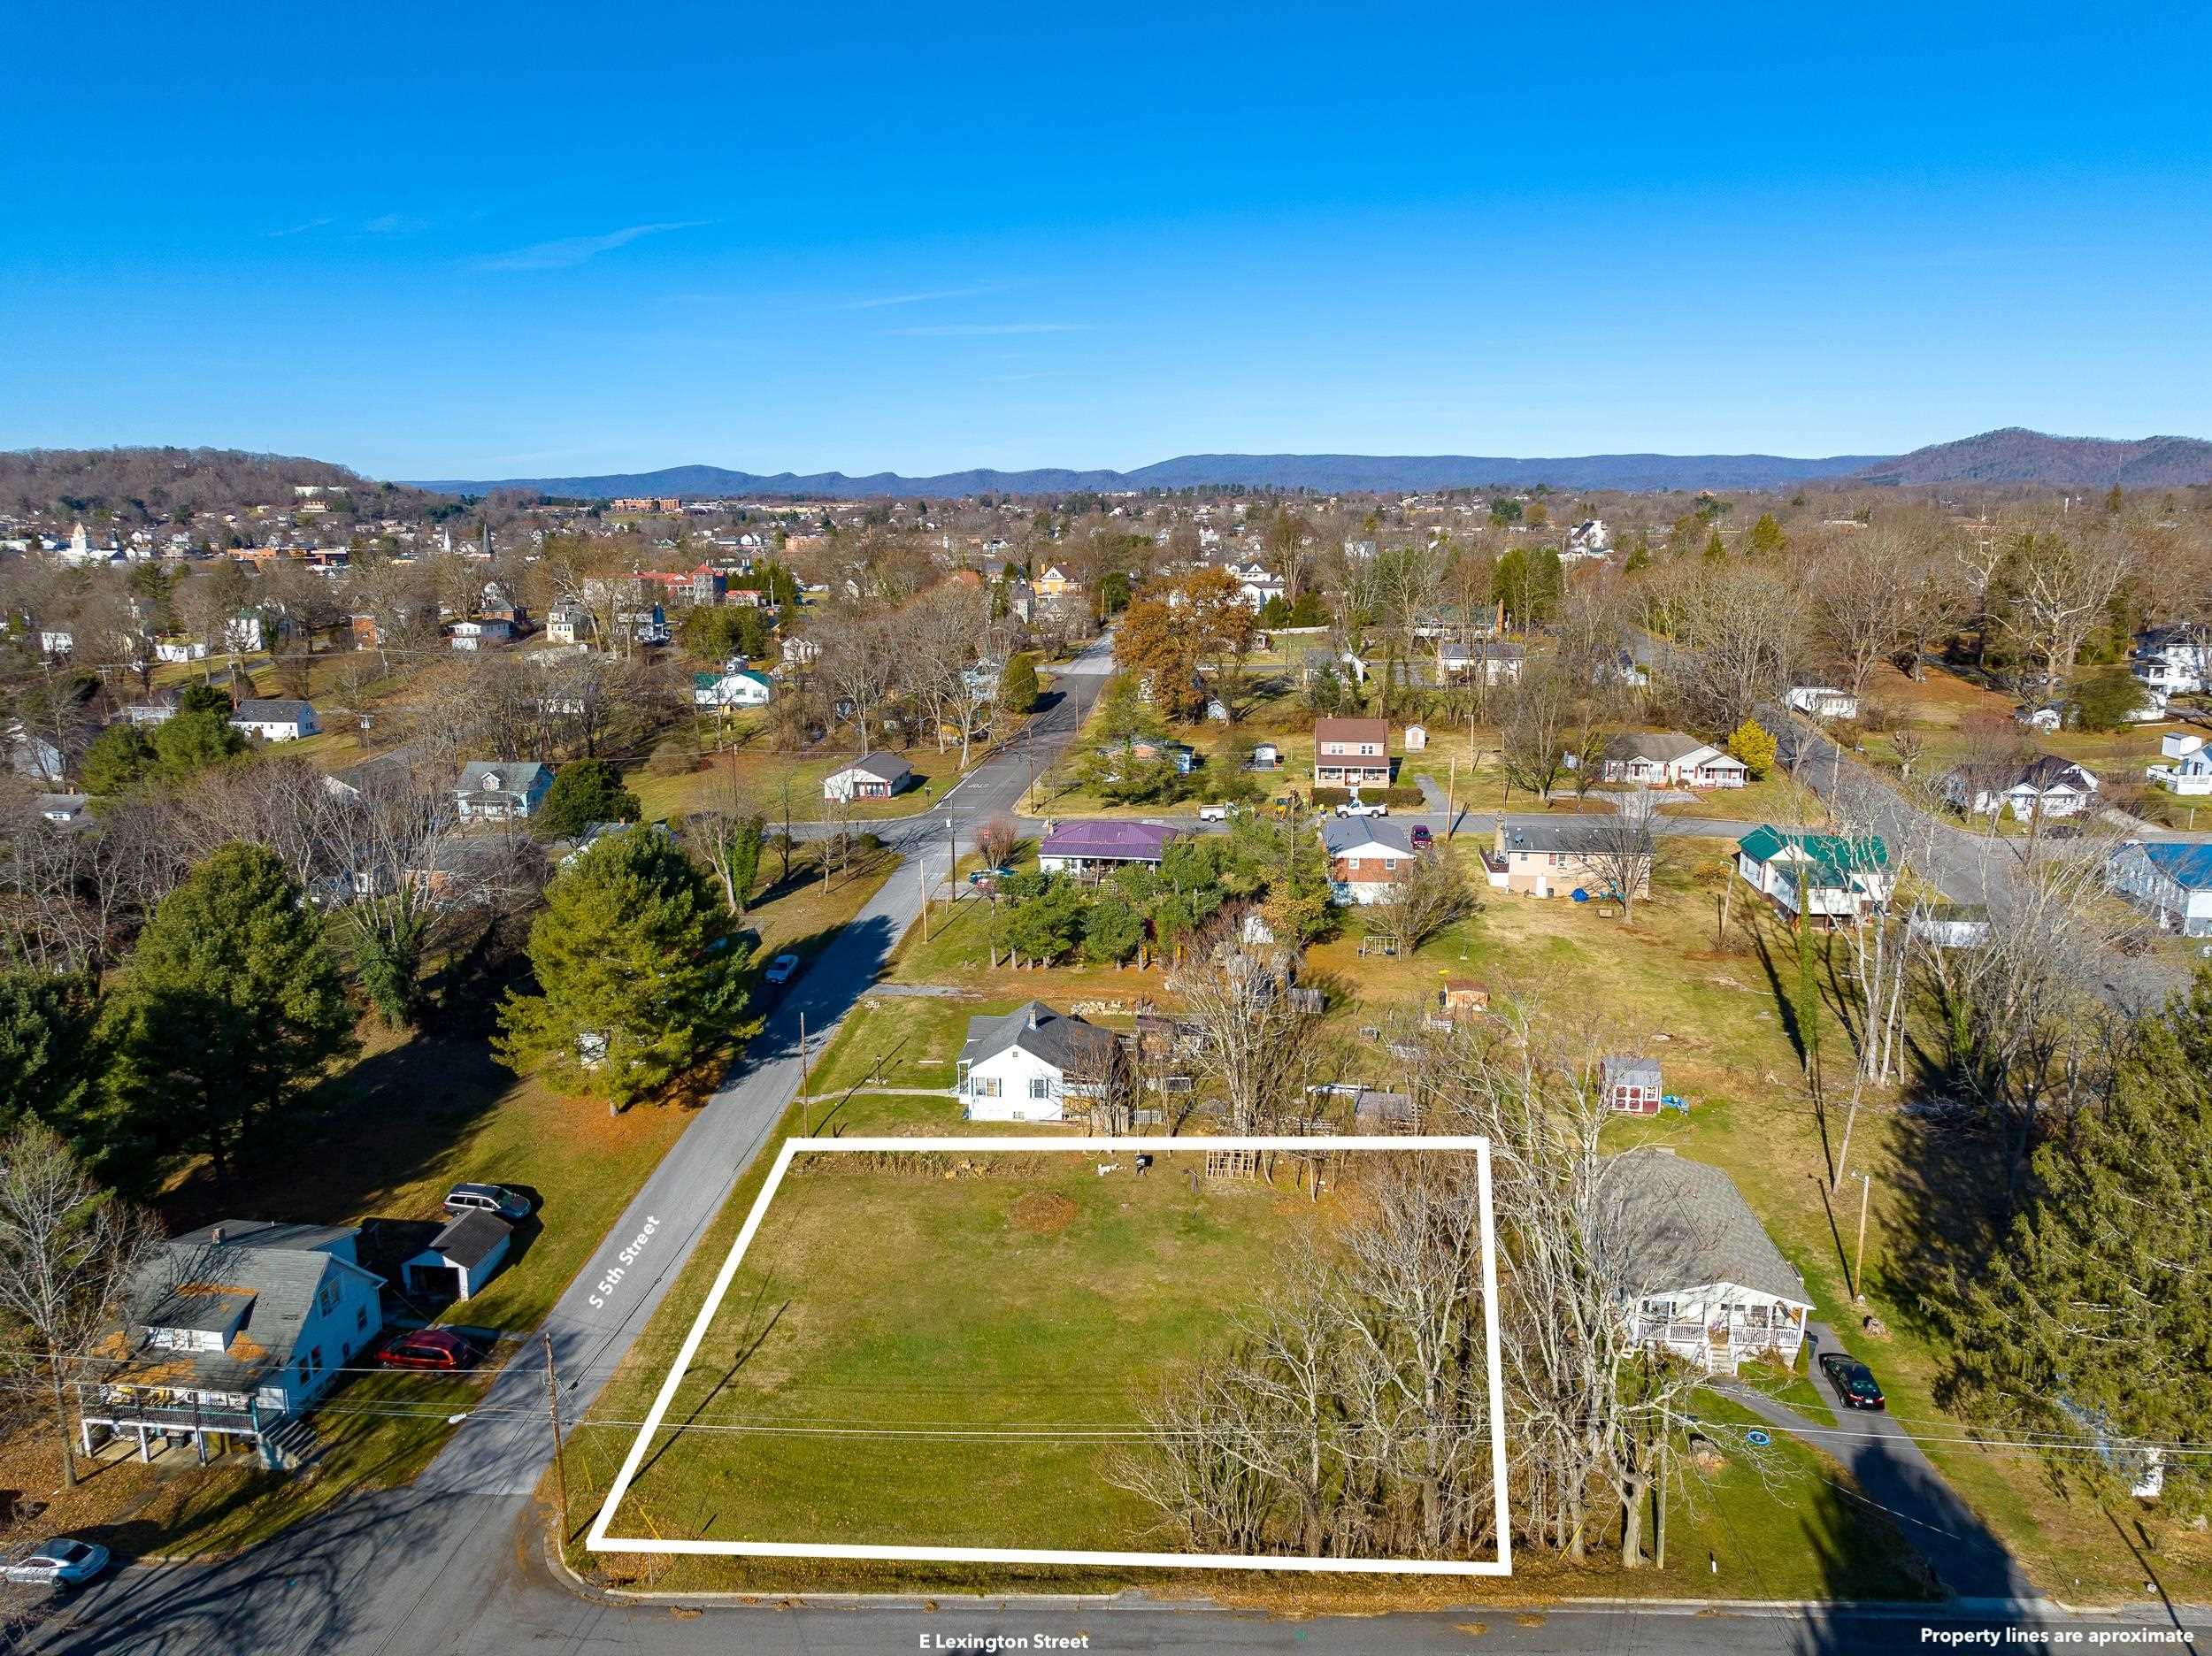 Have you been looking for the perfect lot to build on? This is it! This corner lot allows you to build a generously sized home while also providing a nice yard to enjoy, on a quiet street. You can also sit on your front porch and take in the views of the mountain as it shows off during the seasons. Or, use the lot as an investment opportunity to build multi-family housing and generate income from the property. Come take a look and picture the possibilities for yourself! Public Water and Sewer.